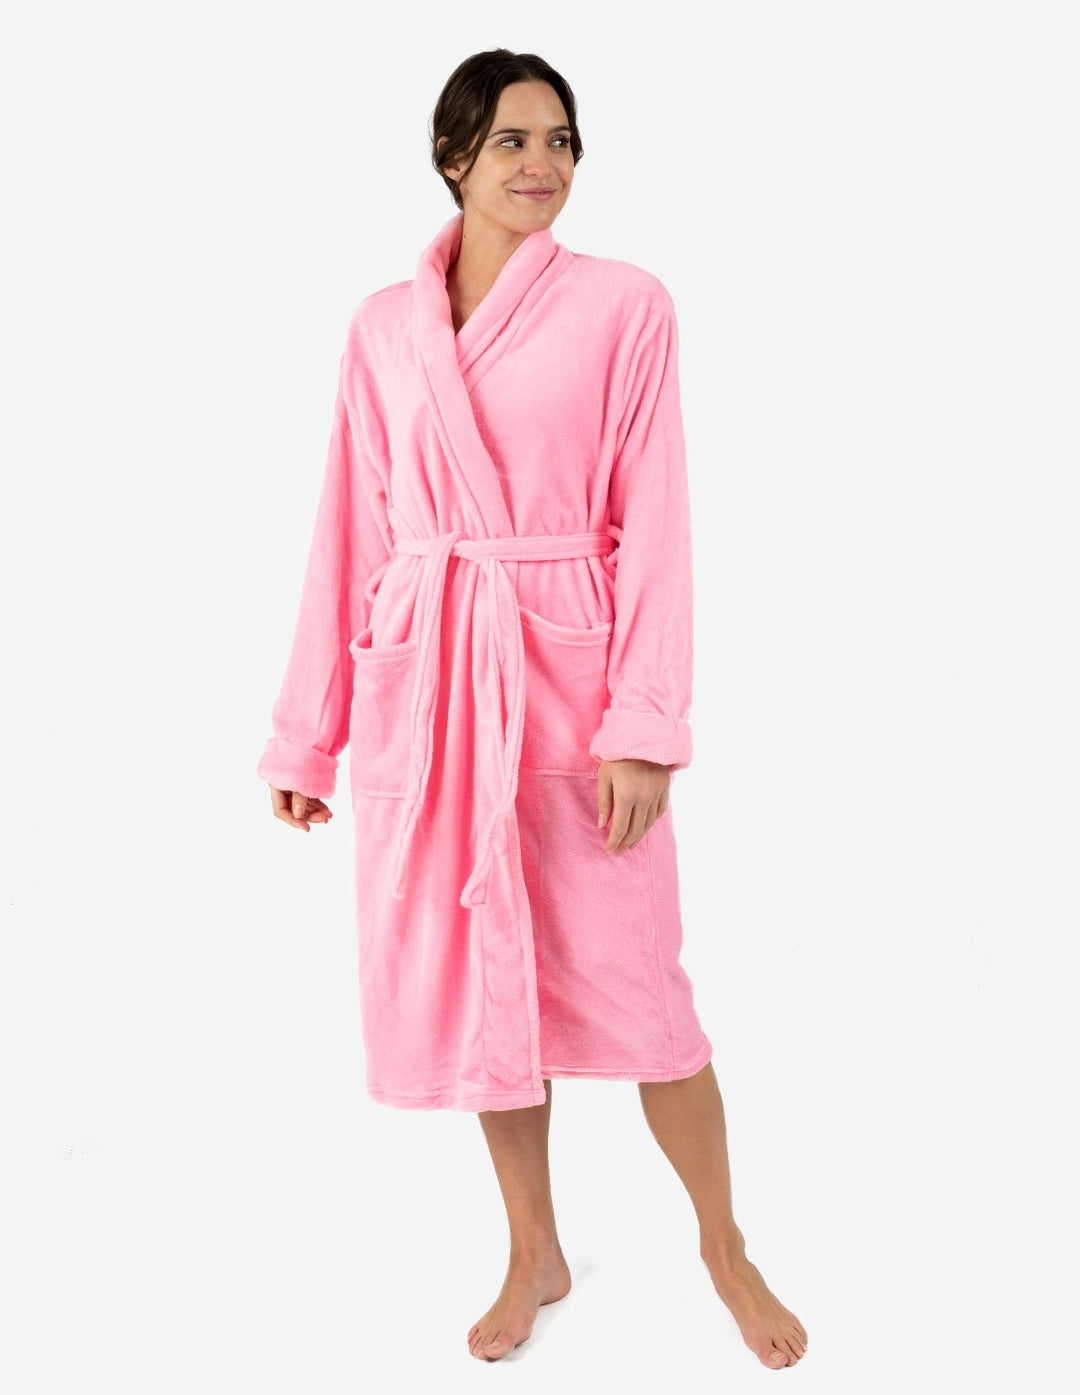 a woman standing in a pink robe from Leveret